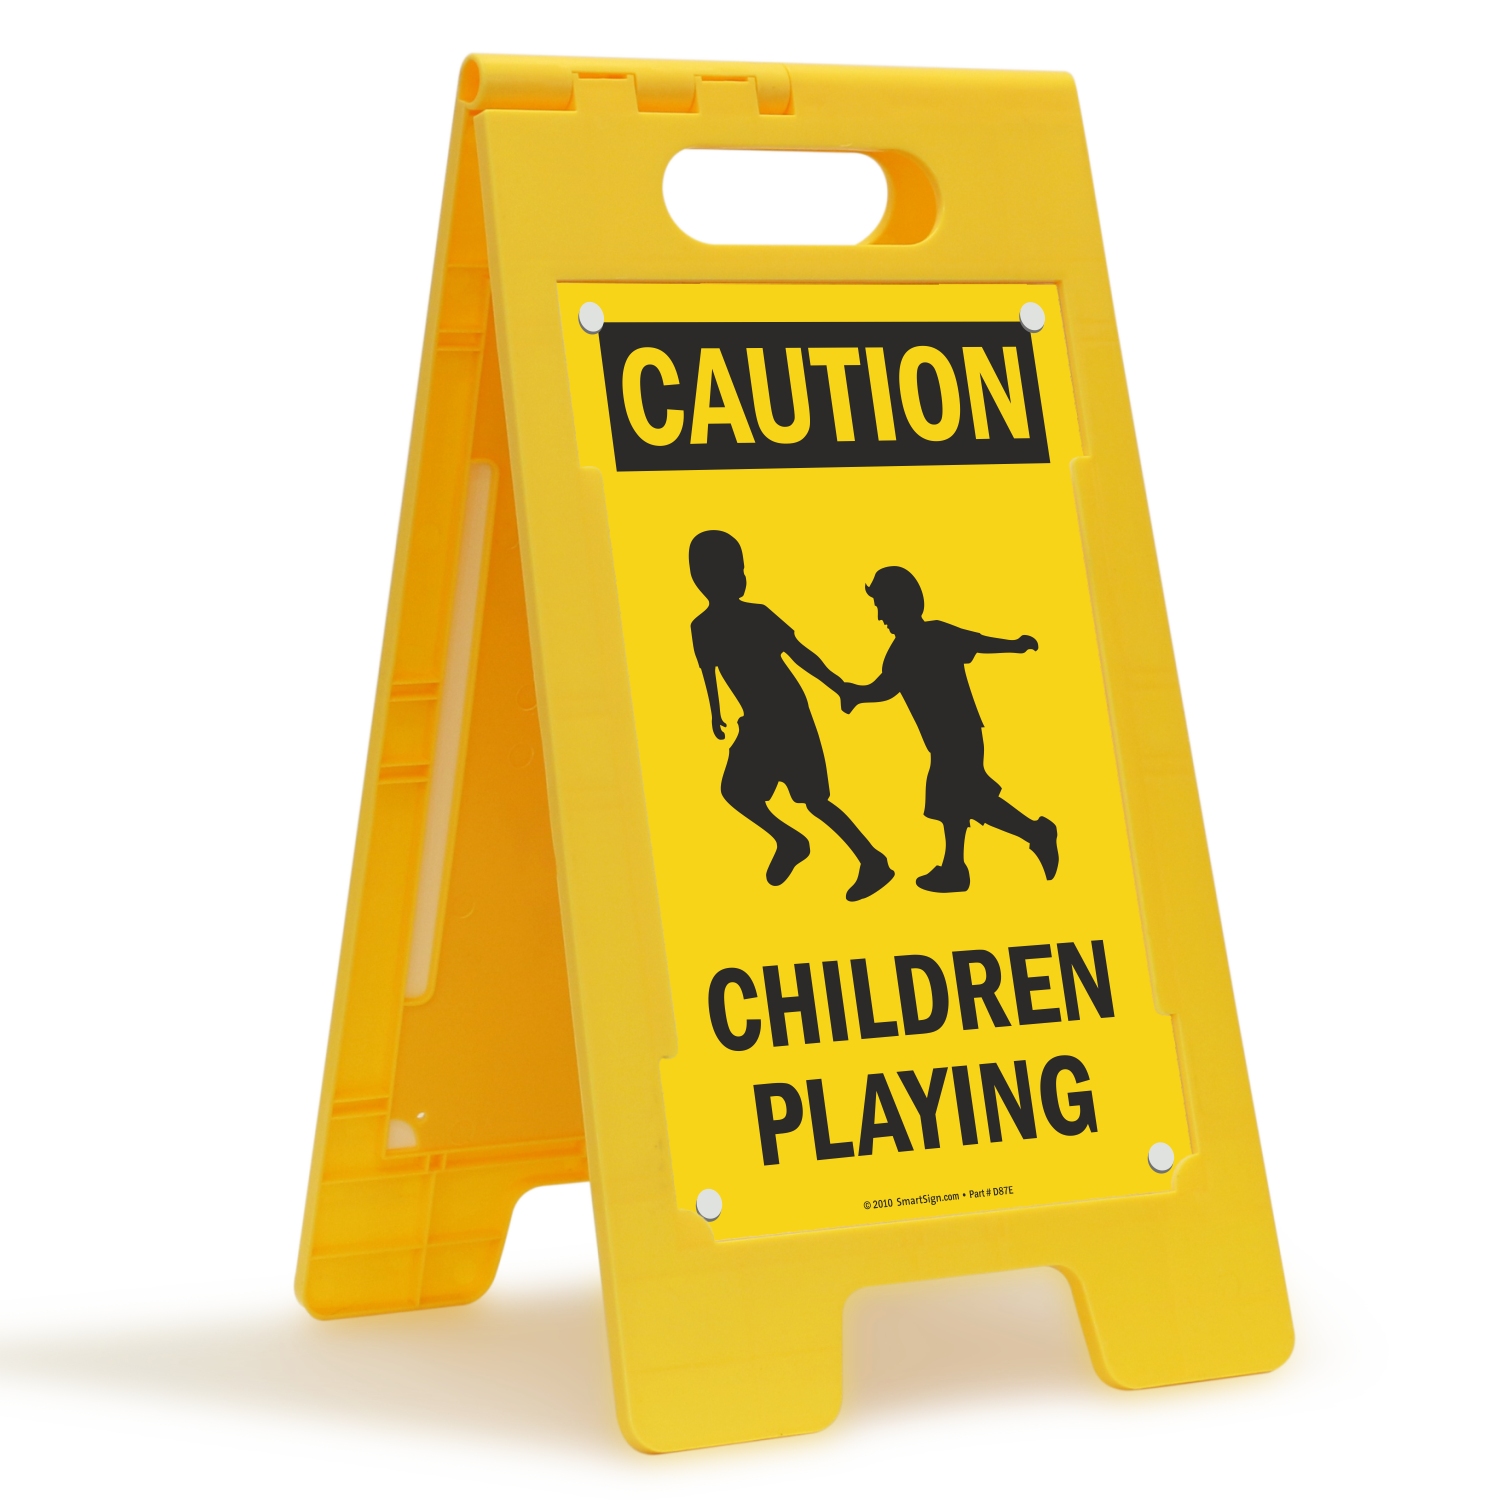 Drive With Caution Children Playing Correx Safety Sign 300mm x 200mm Red 